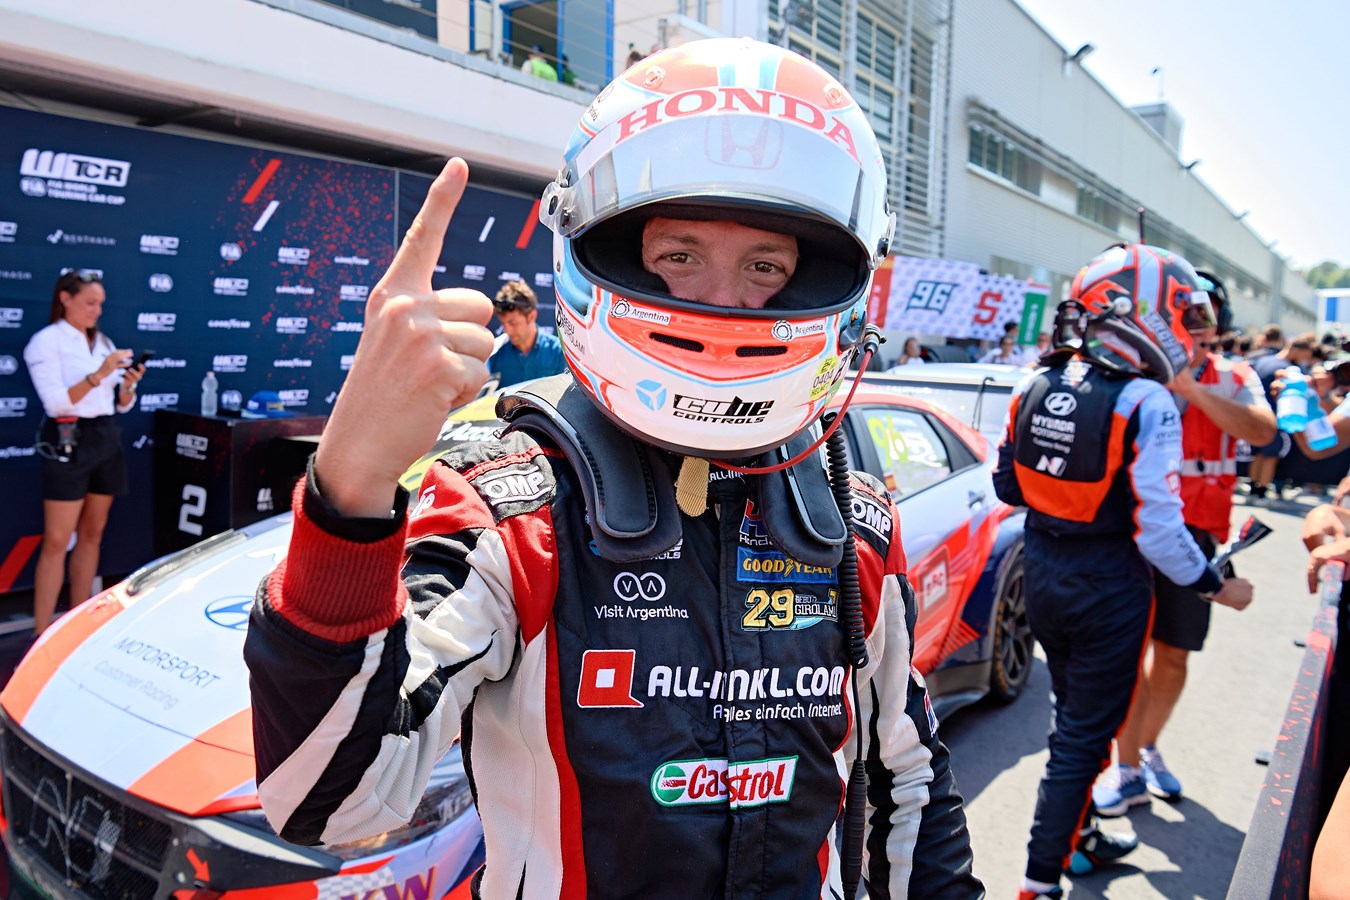 Vallelunga victory for Civic Type R TCR racer Girolami